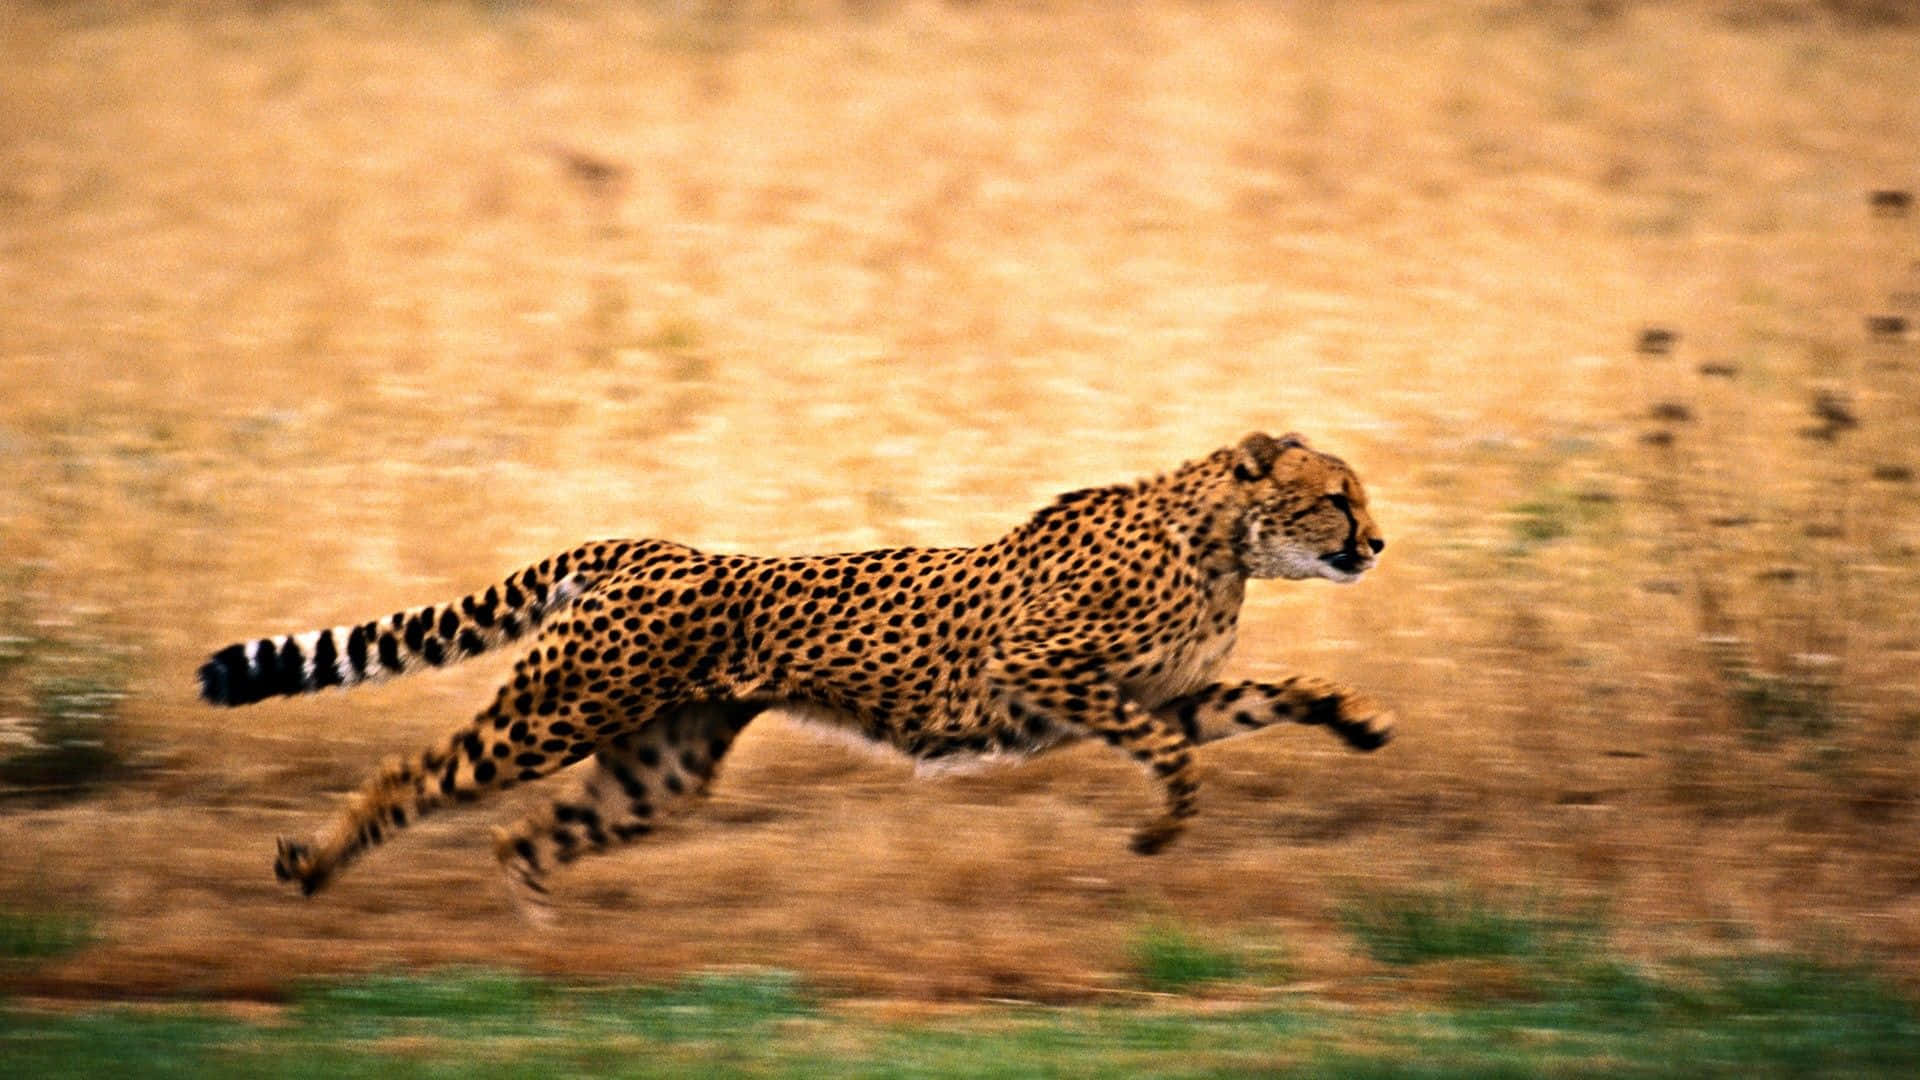 Close Up of a Gorgeous Cheetah in the Wild